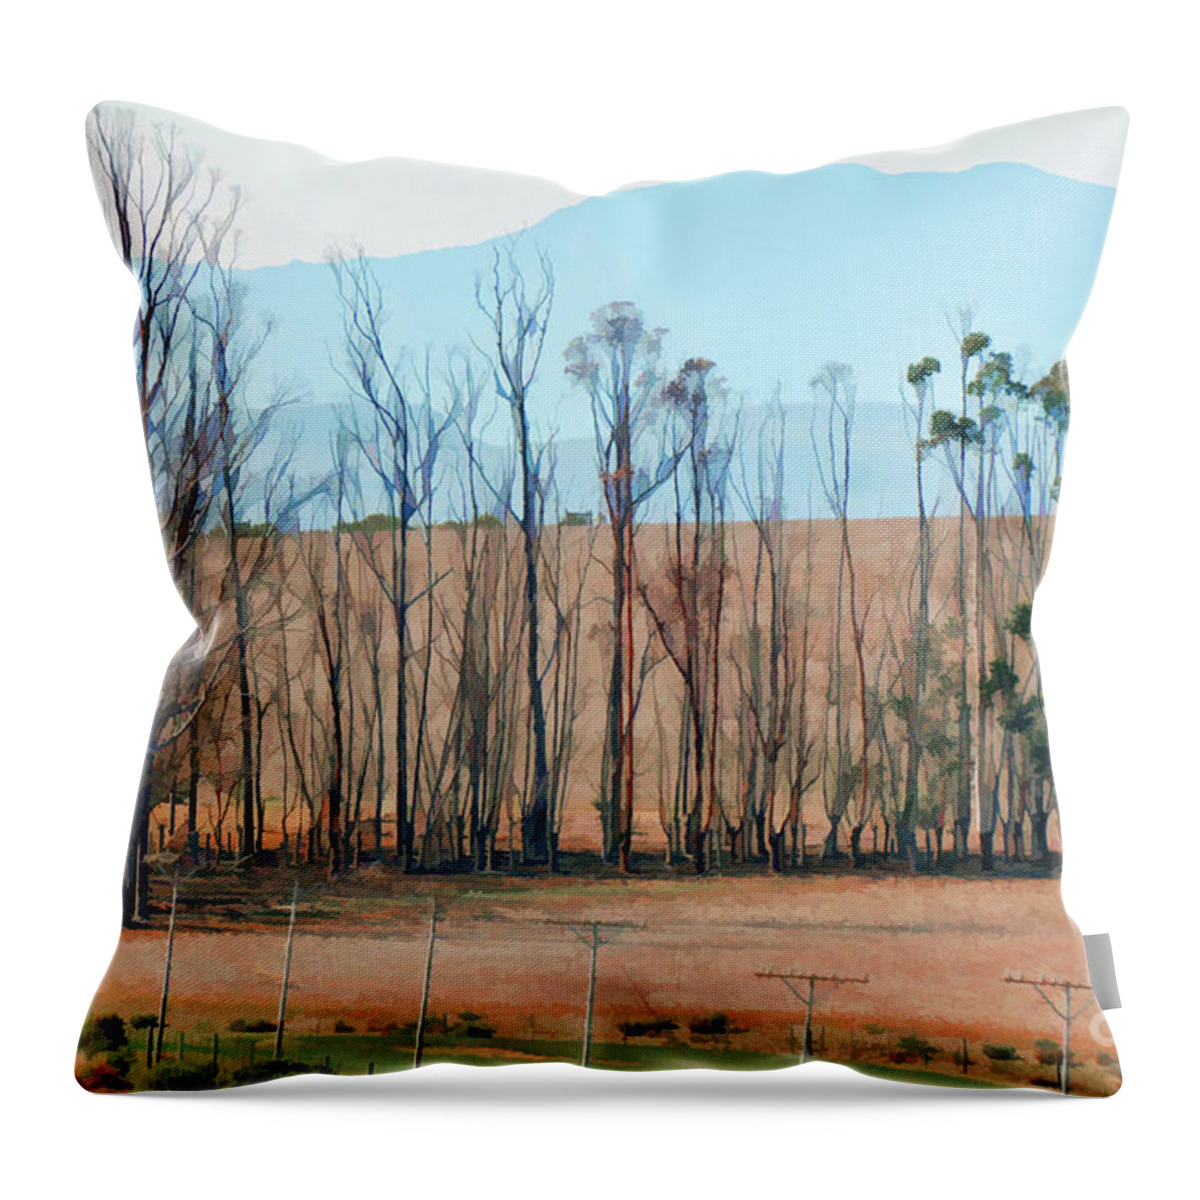 South Africa Throw Pillow featuring the photograph Drought-stricken South African farmlands - 3 of 3 by Josephine Cohn